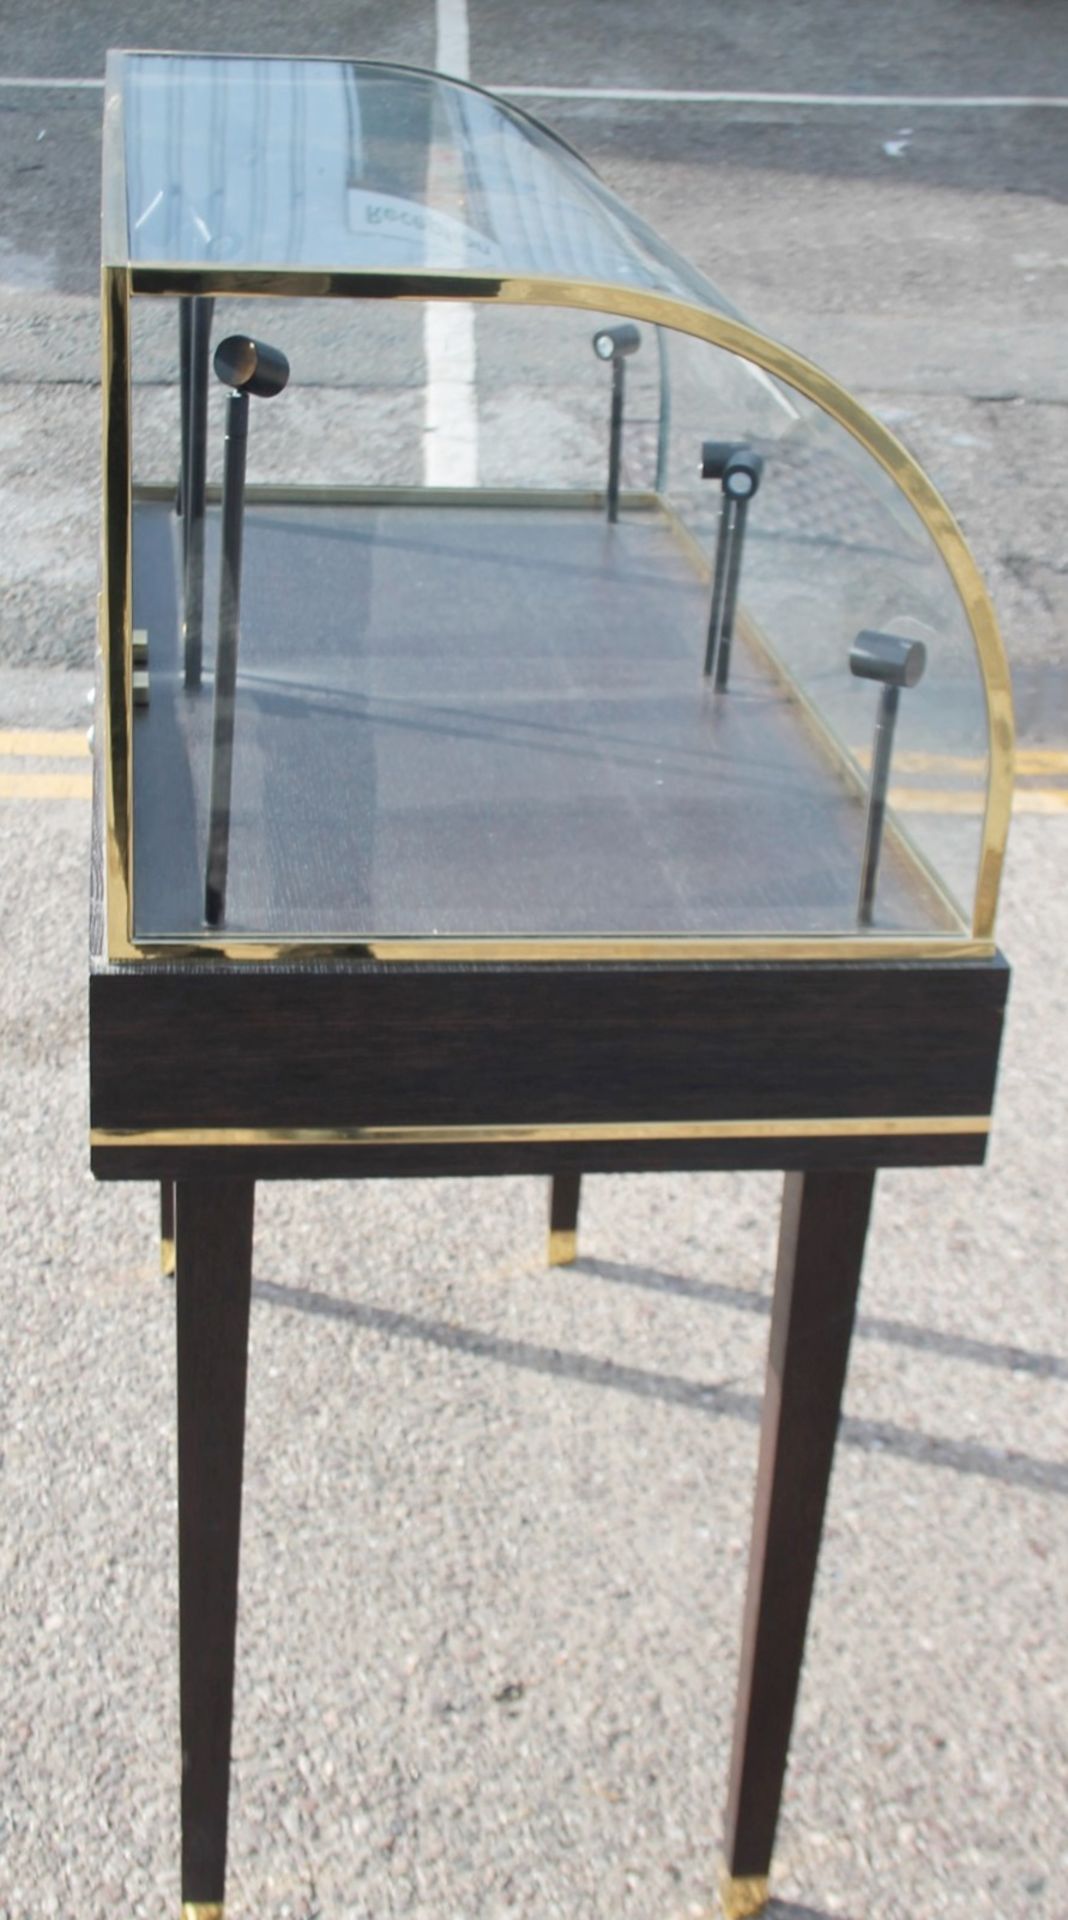 1 x Impressive Illuminated Glass Display Case With A Darkwood Base - From A London Department Store - Image 5 of 12